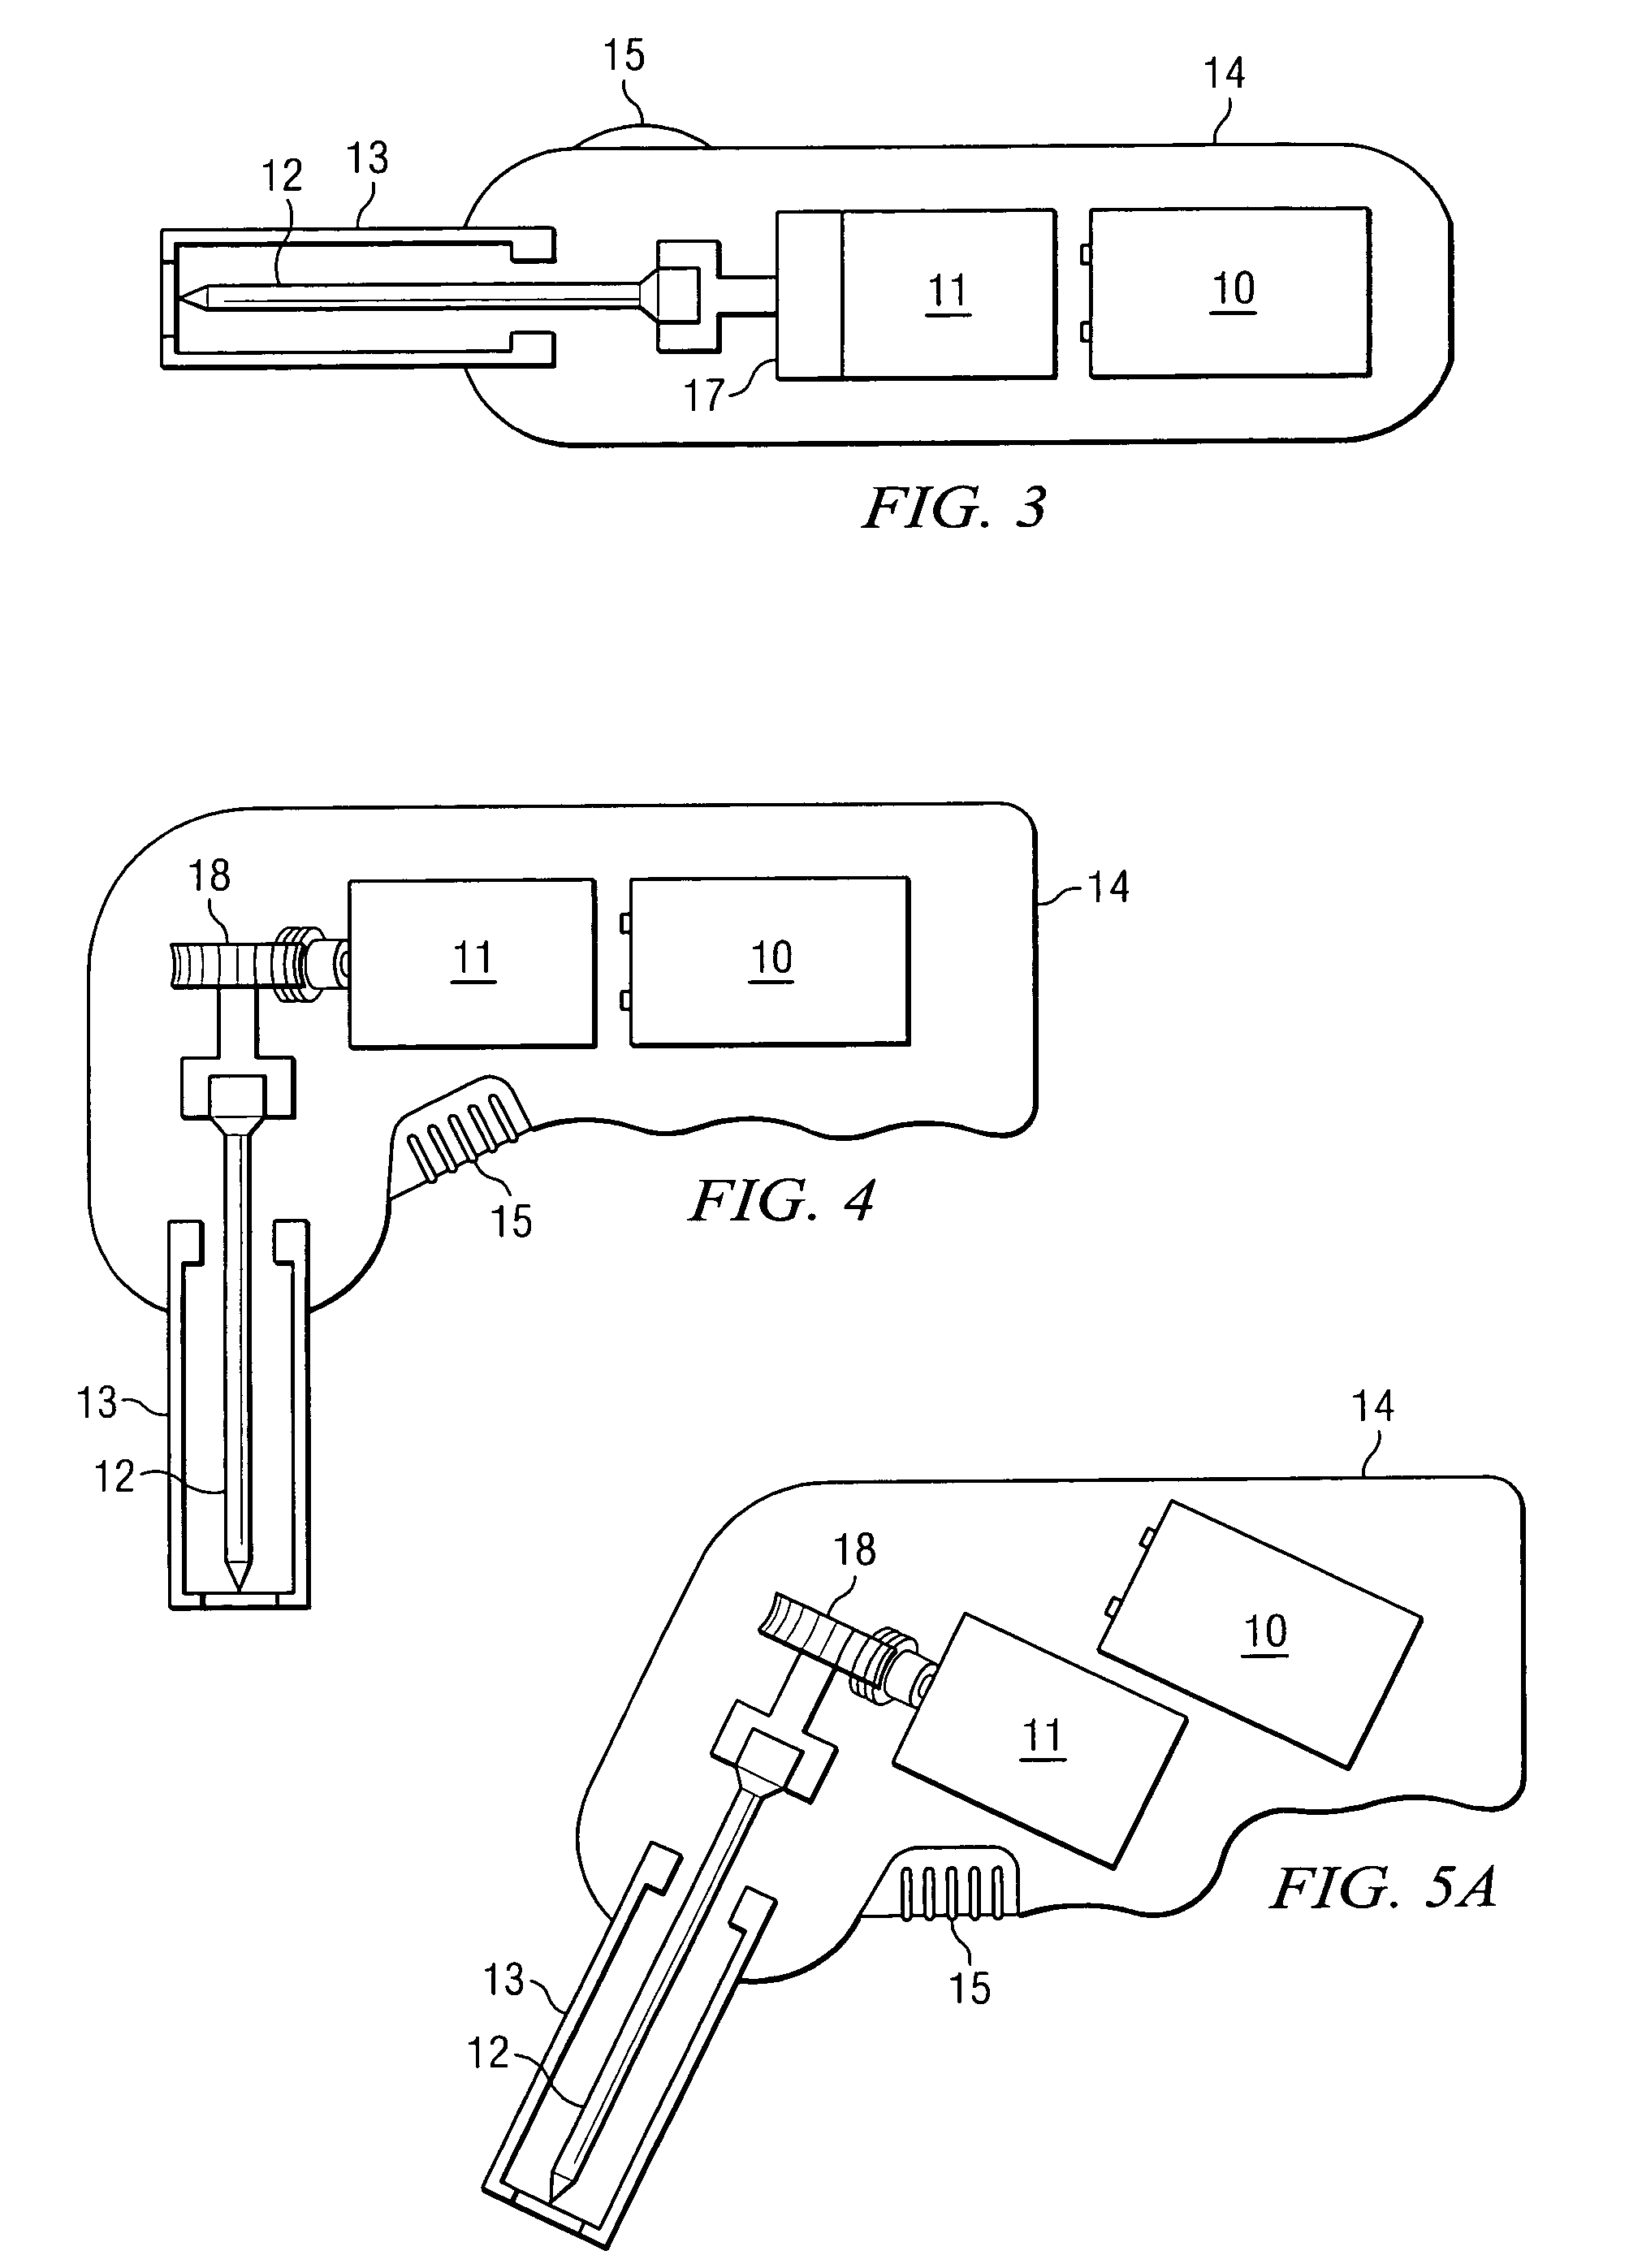 Apparatus and method to provide emergency access to bone marrow